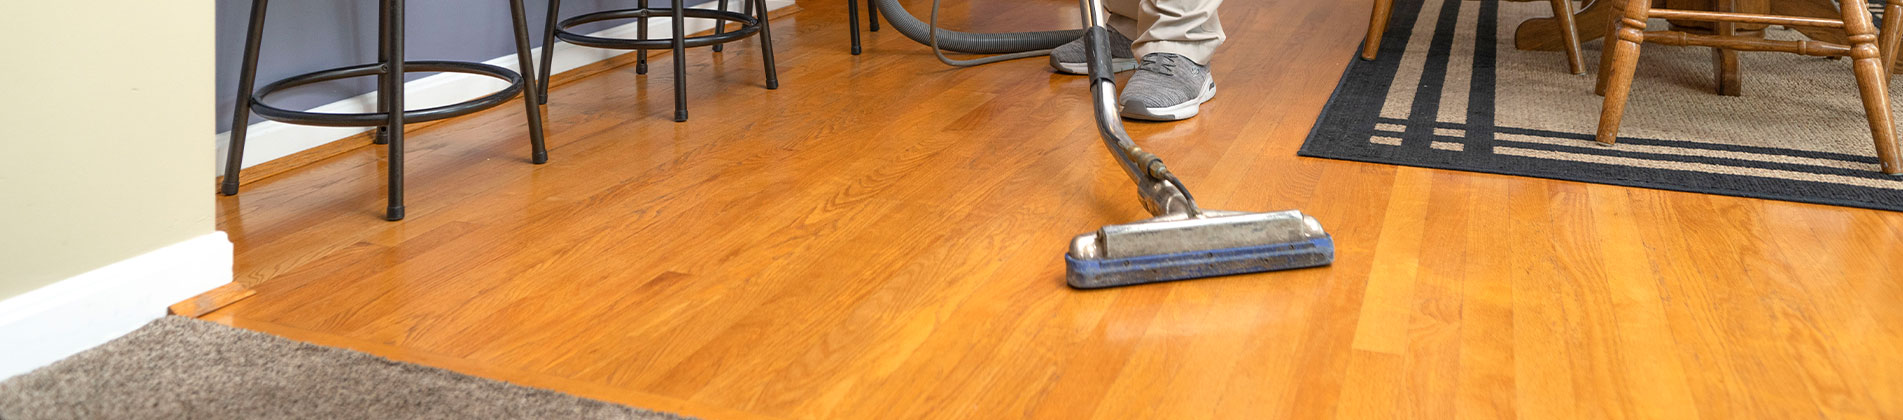 Residential and commercial floor and carpet cleaning in eaton oh